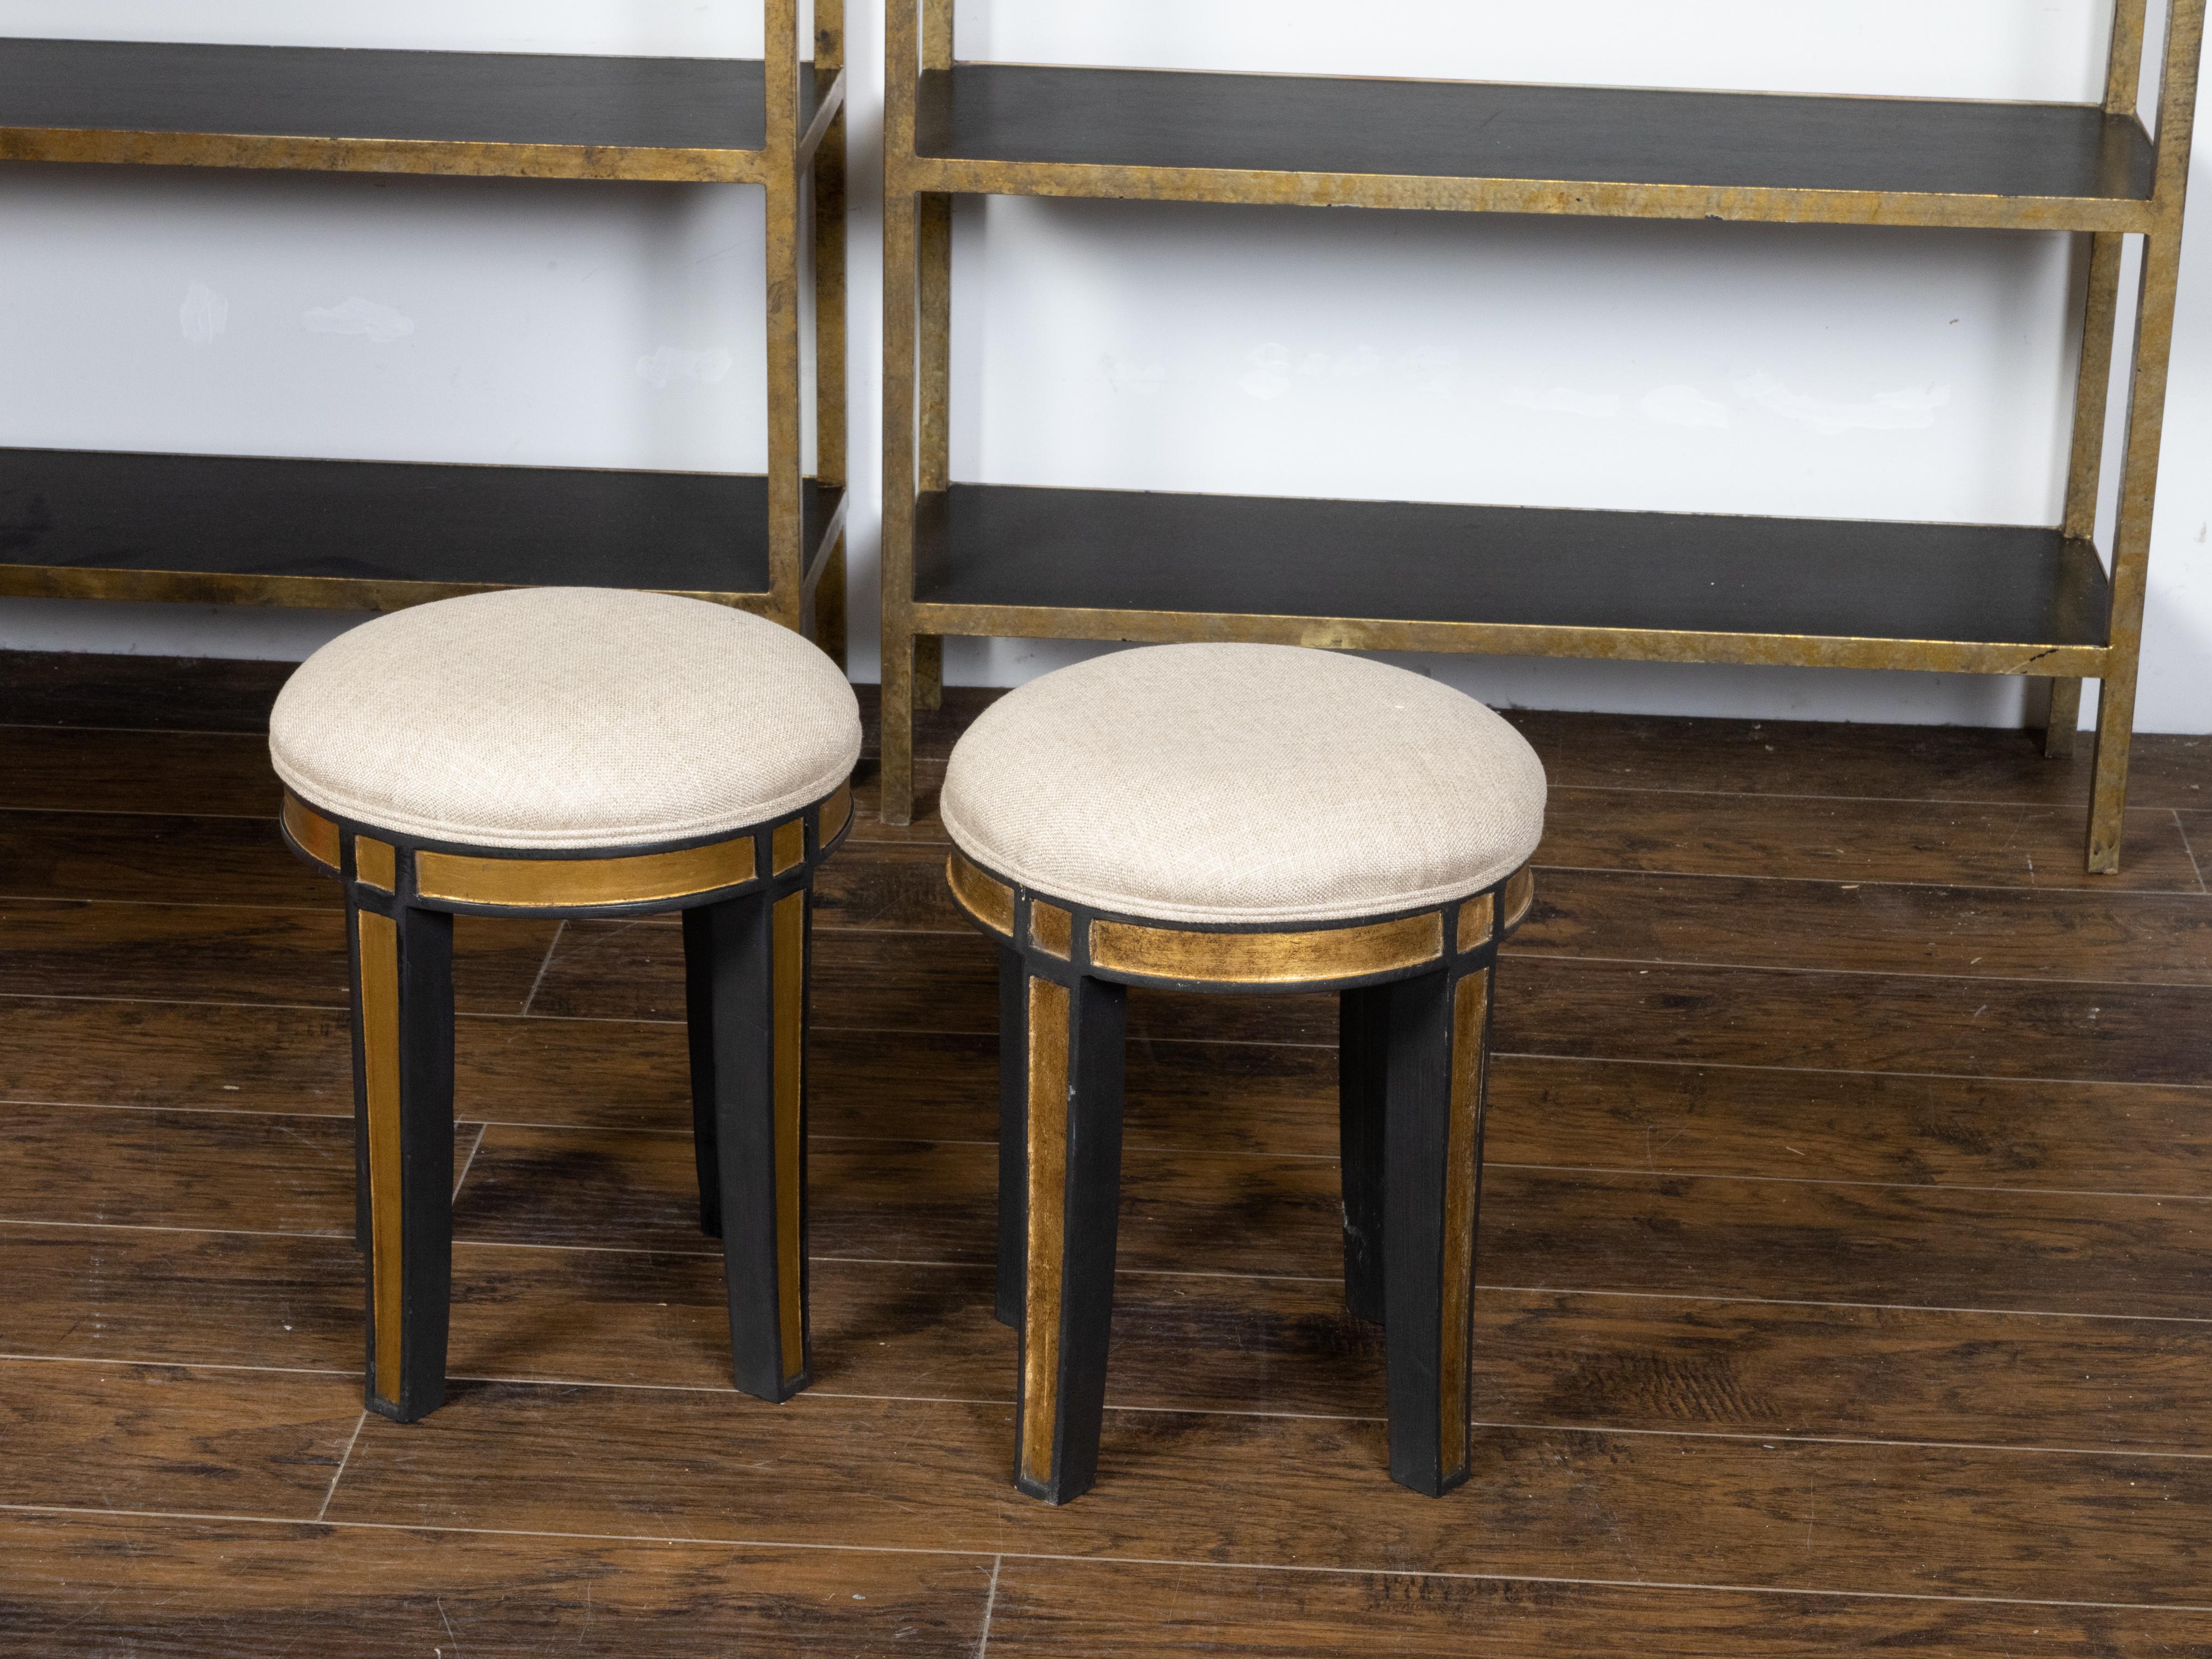 Upholstery Pair of Midcentury Italian Upholstered Stools with Black and Gold Décor For Sale